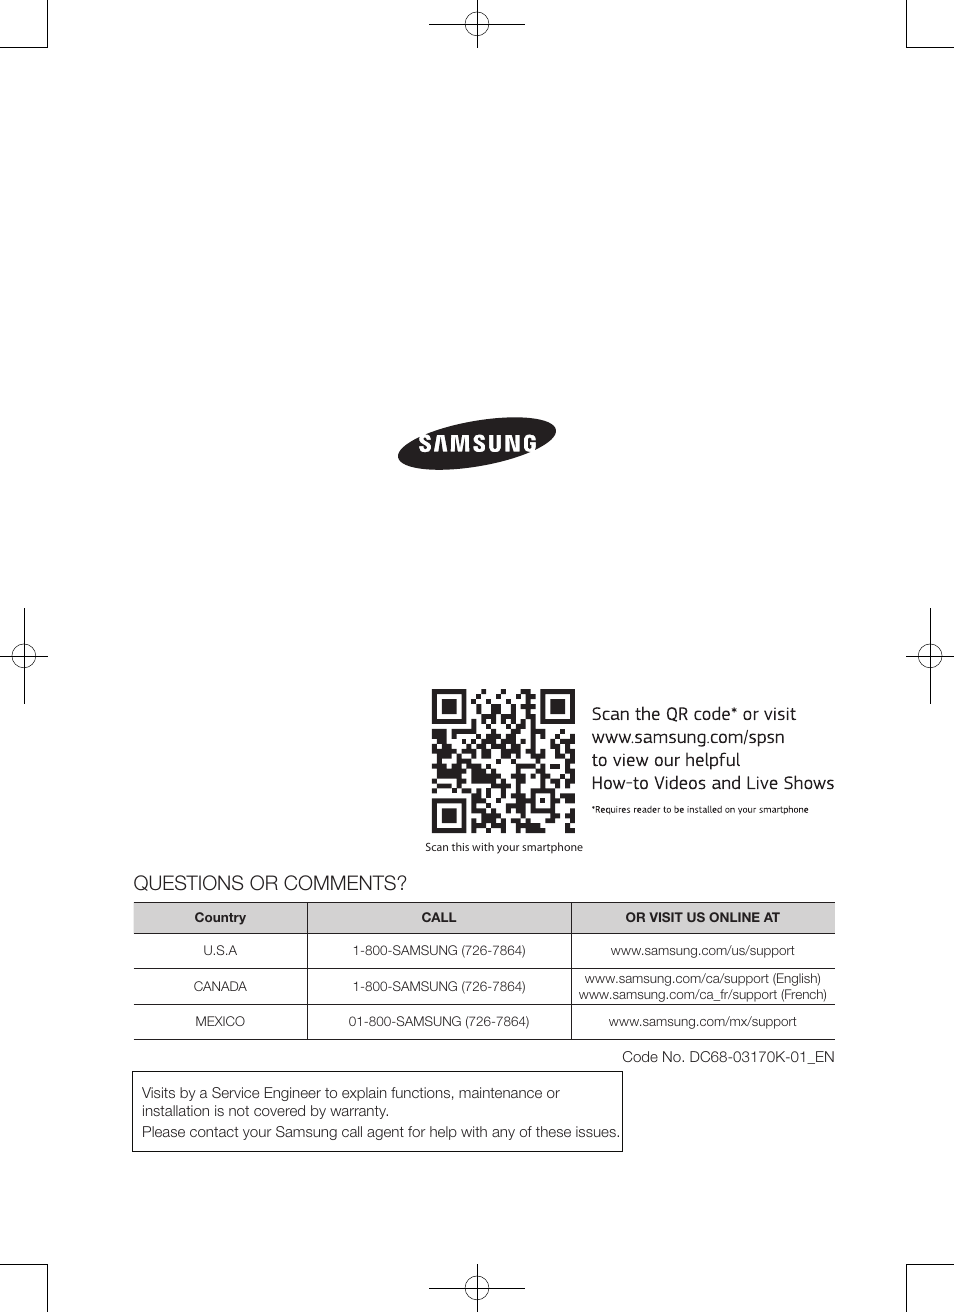 Questions or comments | Samsung DV56H9100EW-A2 User Manual | Page 44 / 132